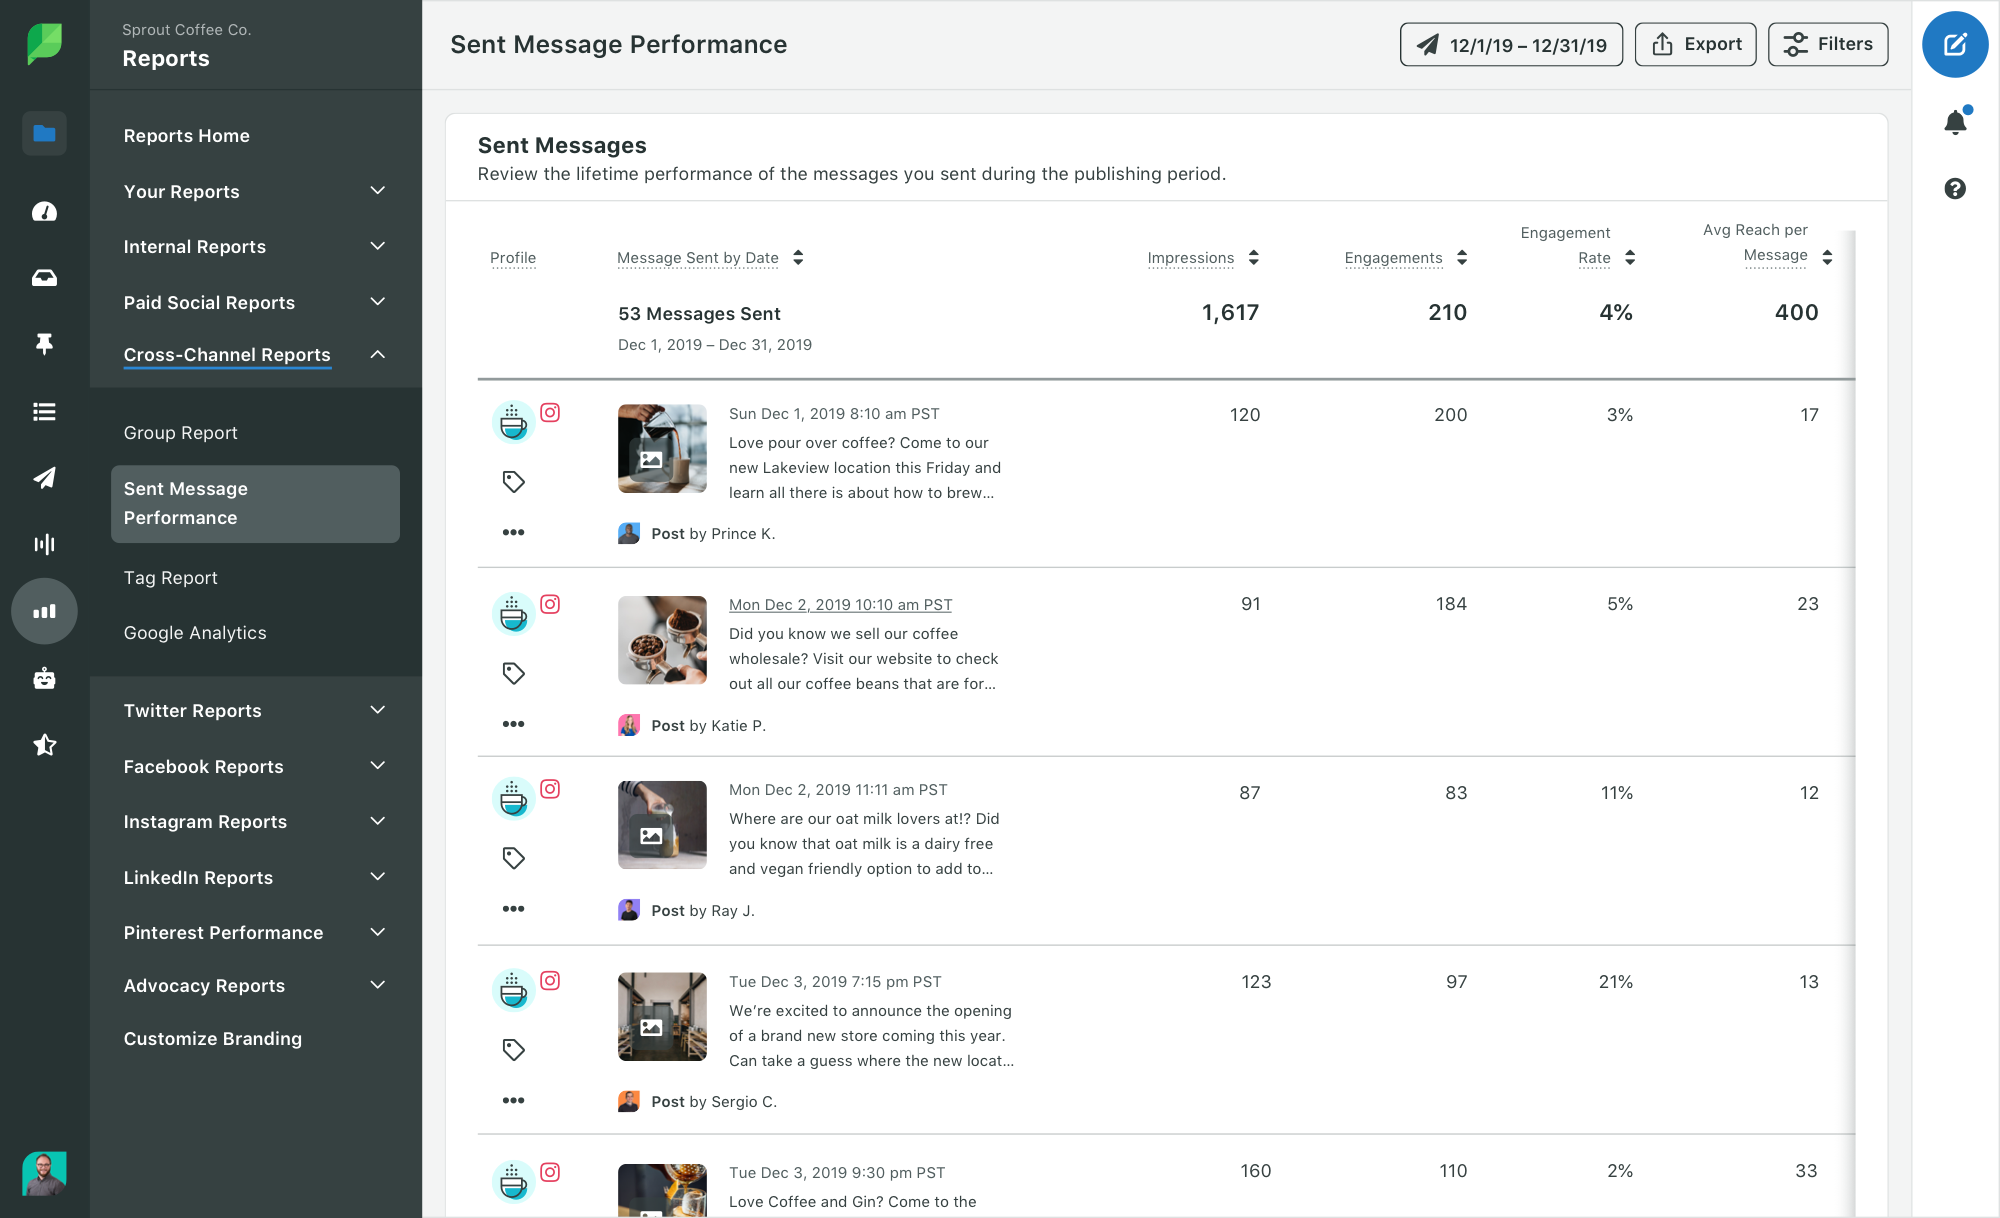 Sprout Social Product Image of Analytics Cross-Channel Sent Message Performance Report